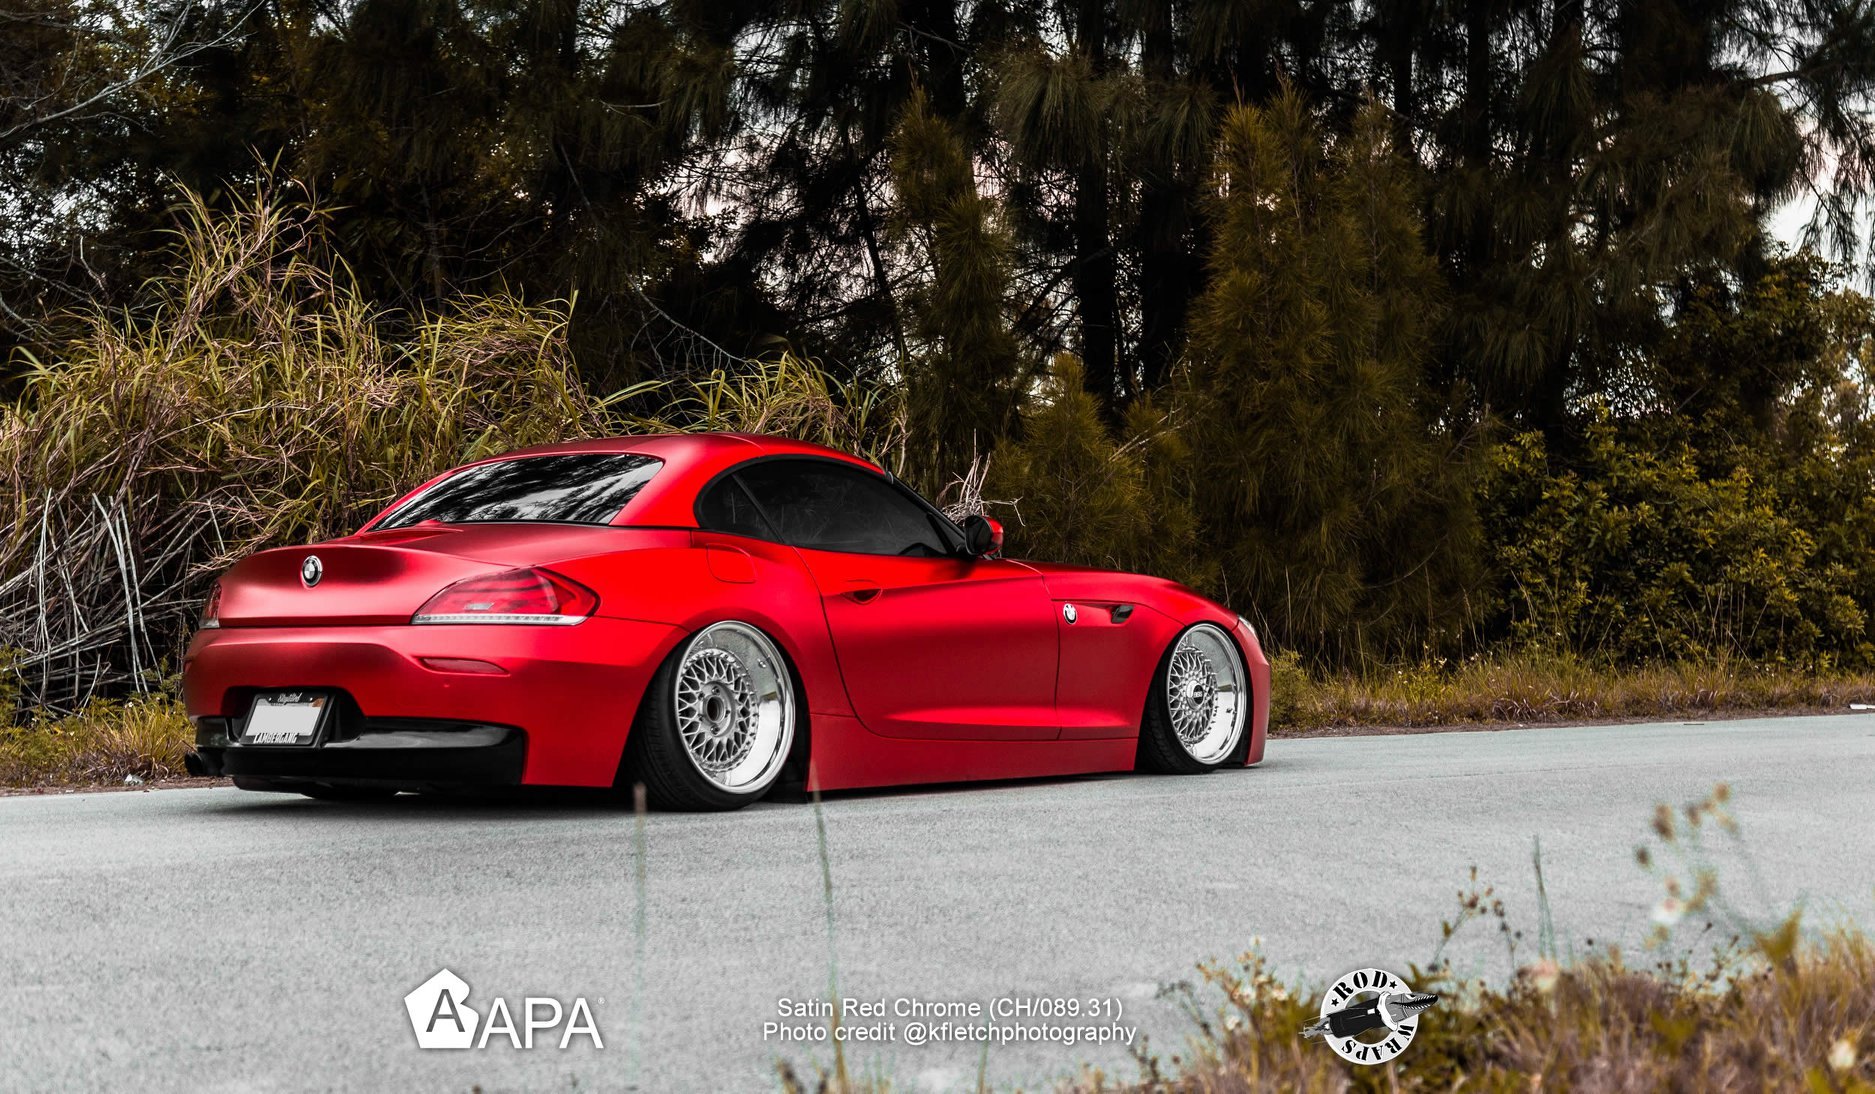 Aftermarket Rear Diffuser on Red Matte BMW Z4 - Photo by Apa America